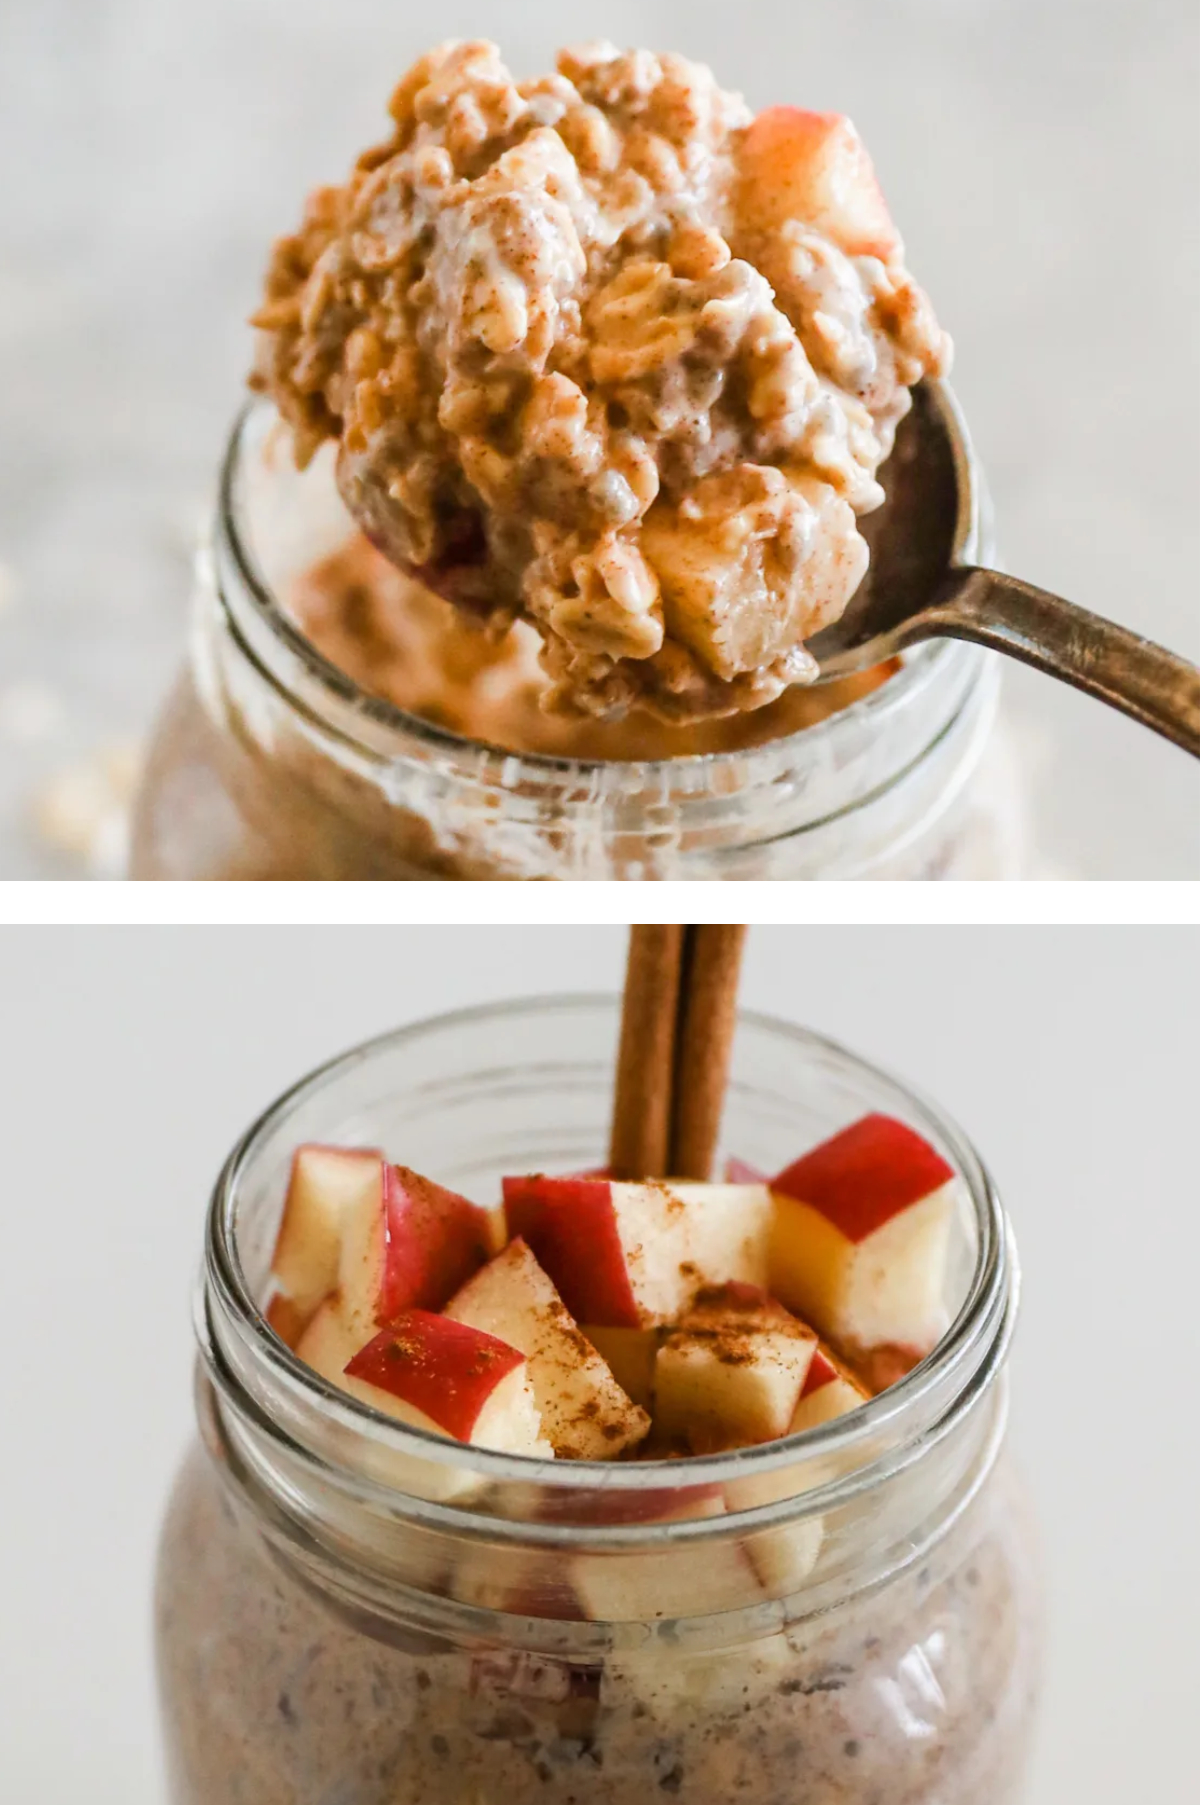 Two images: 1.Closeup of spoon holding mixed oats. 2. Closeup of chopped apple and cinnamon added to mixed oats. 